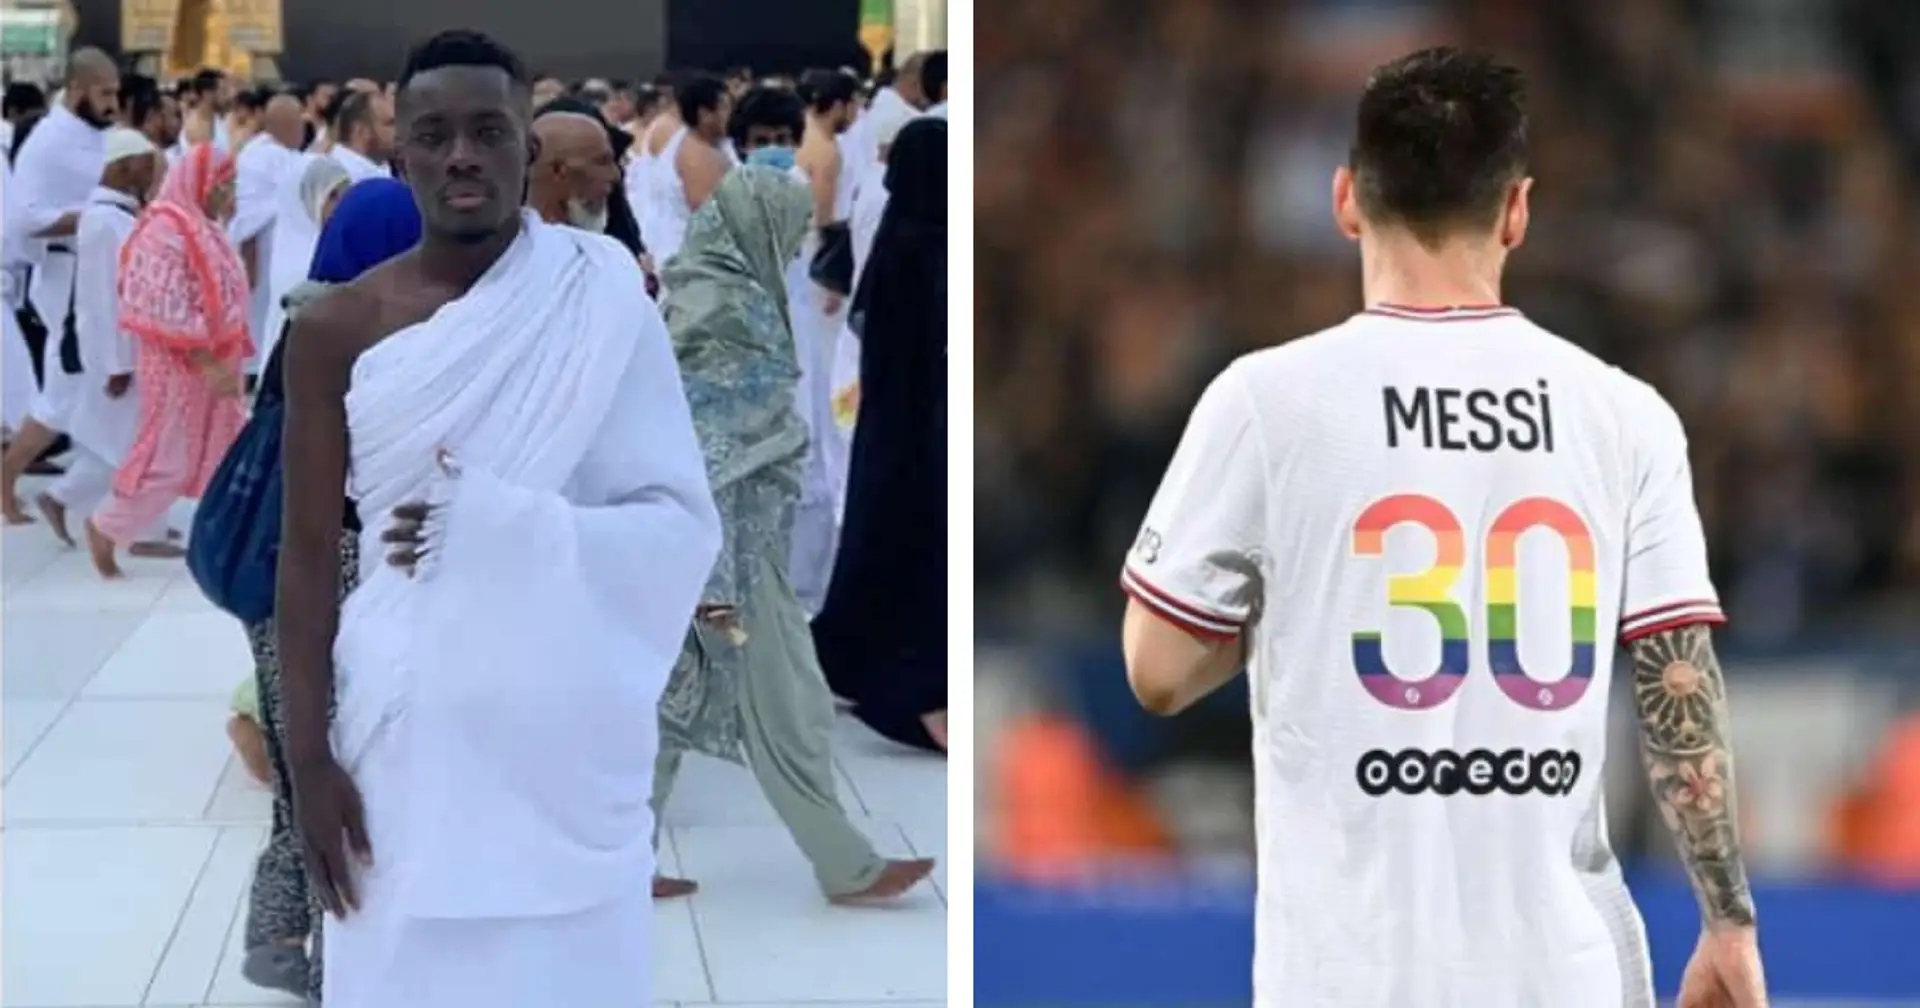 'He is someone who is open to others': Idrissa Gueye representatives deny homophobia accusations